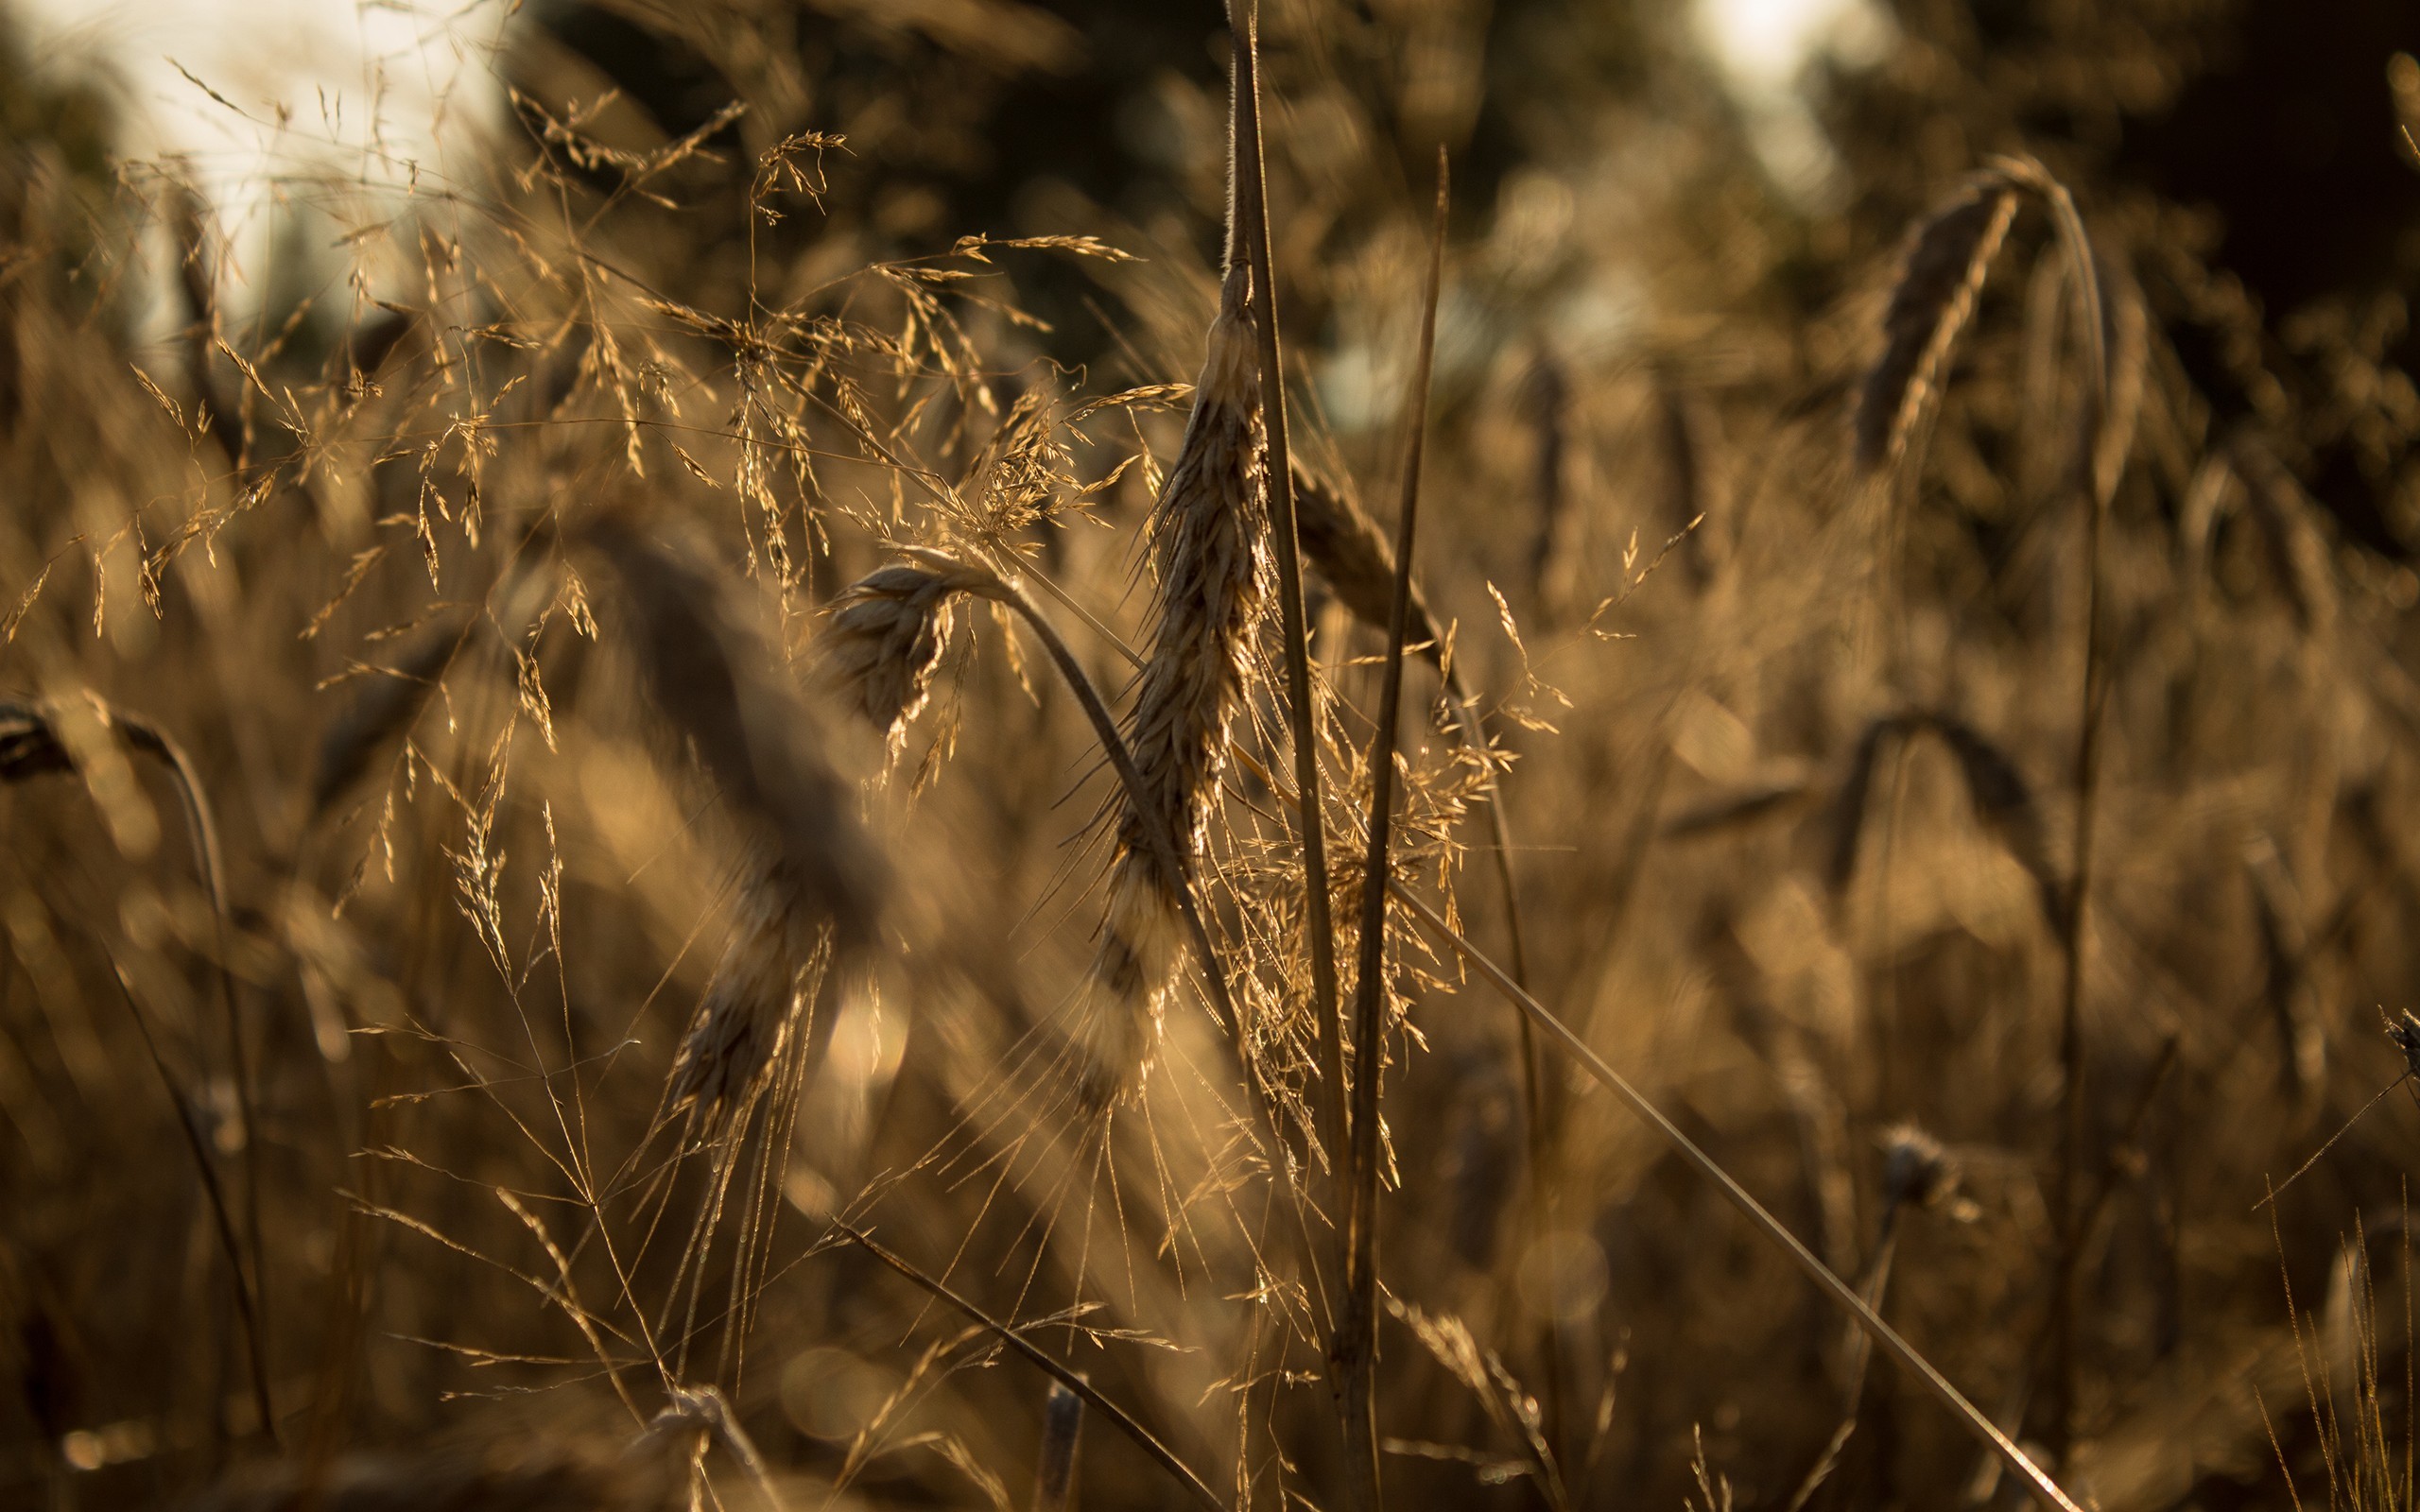 General 2560x1600 wheat plants outdoors